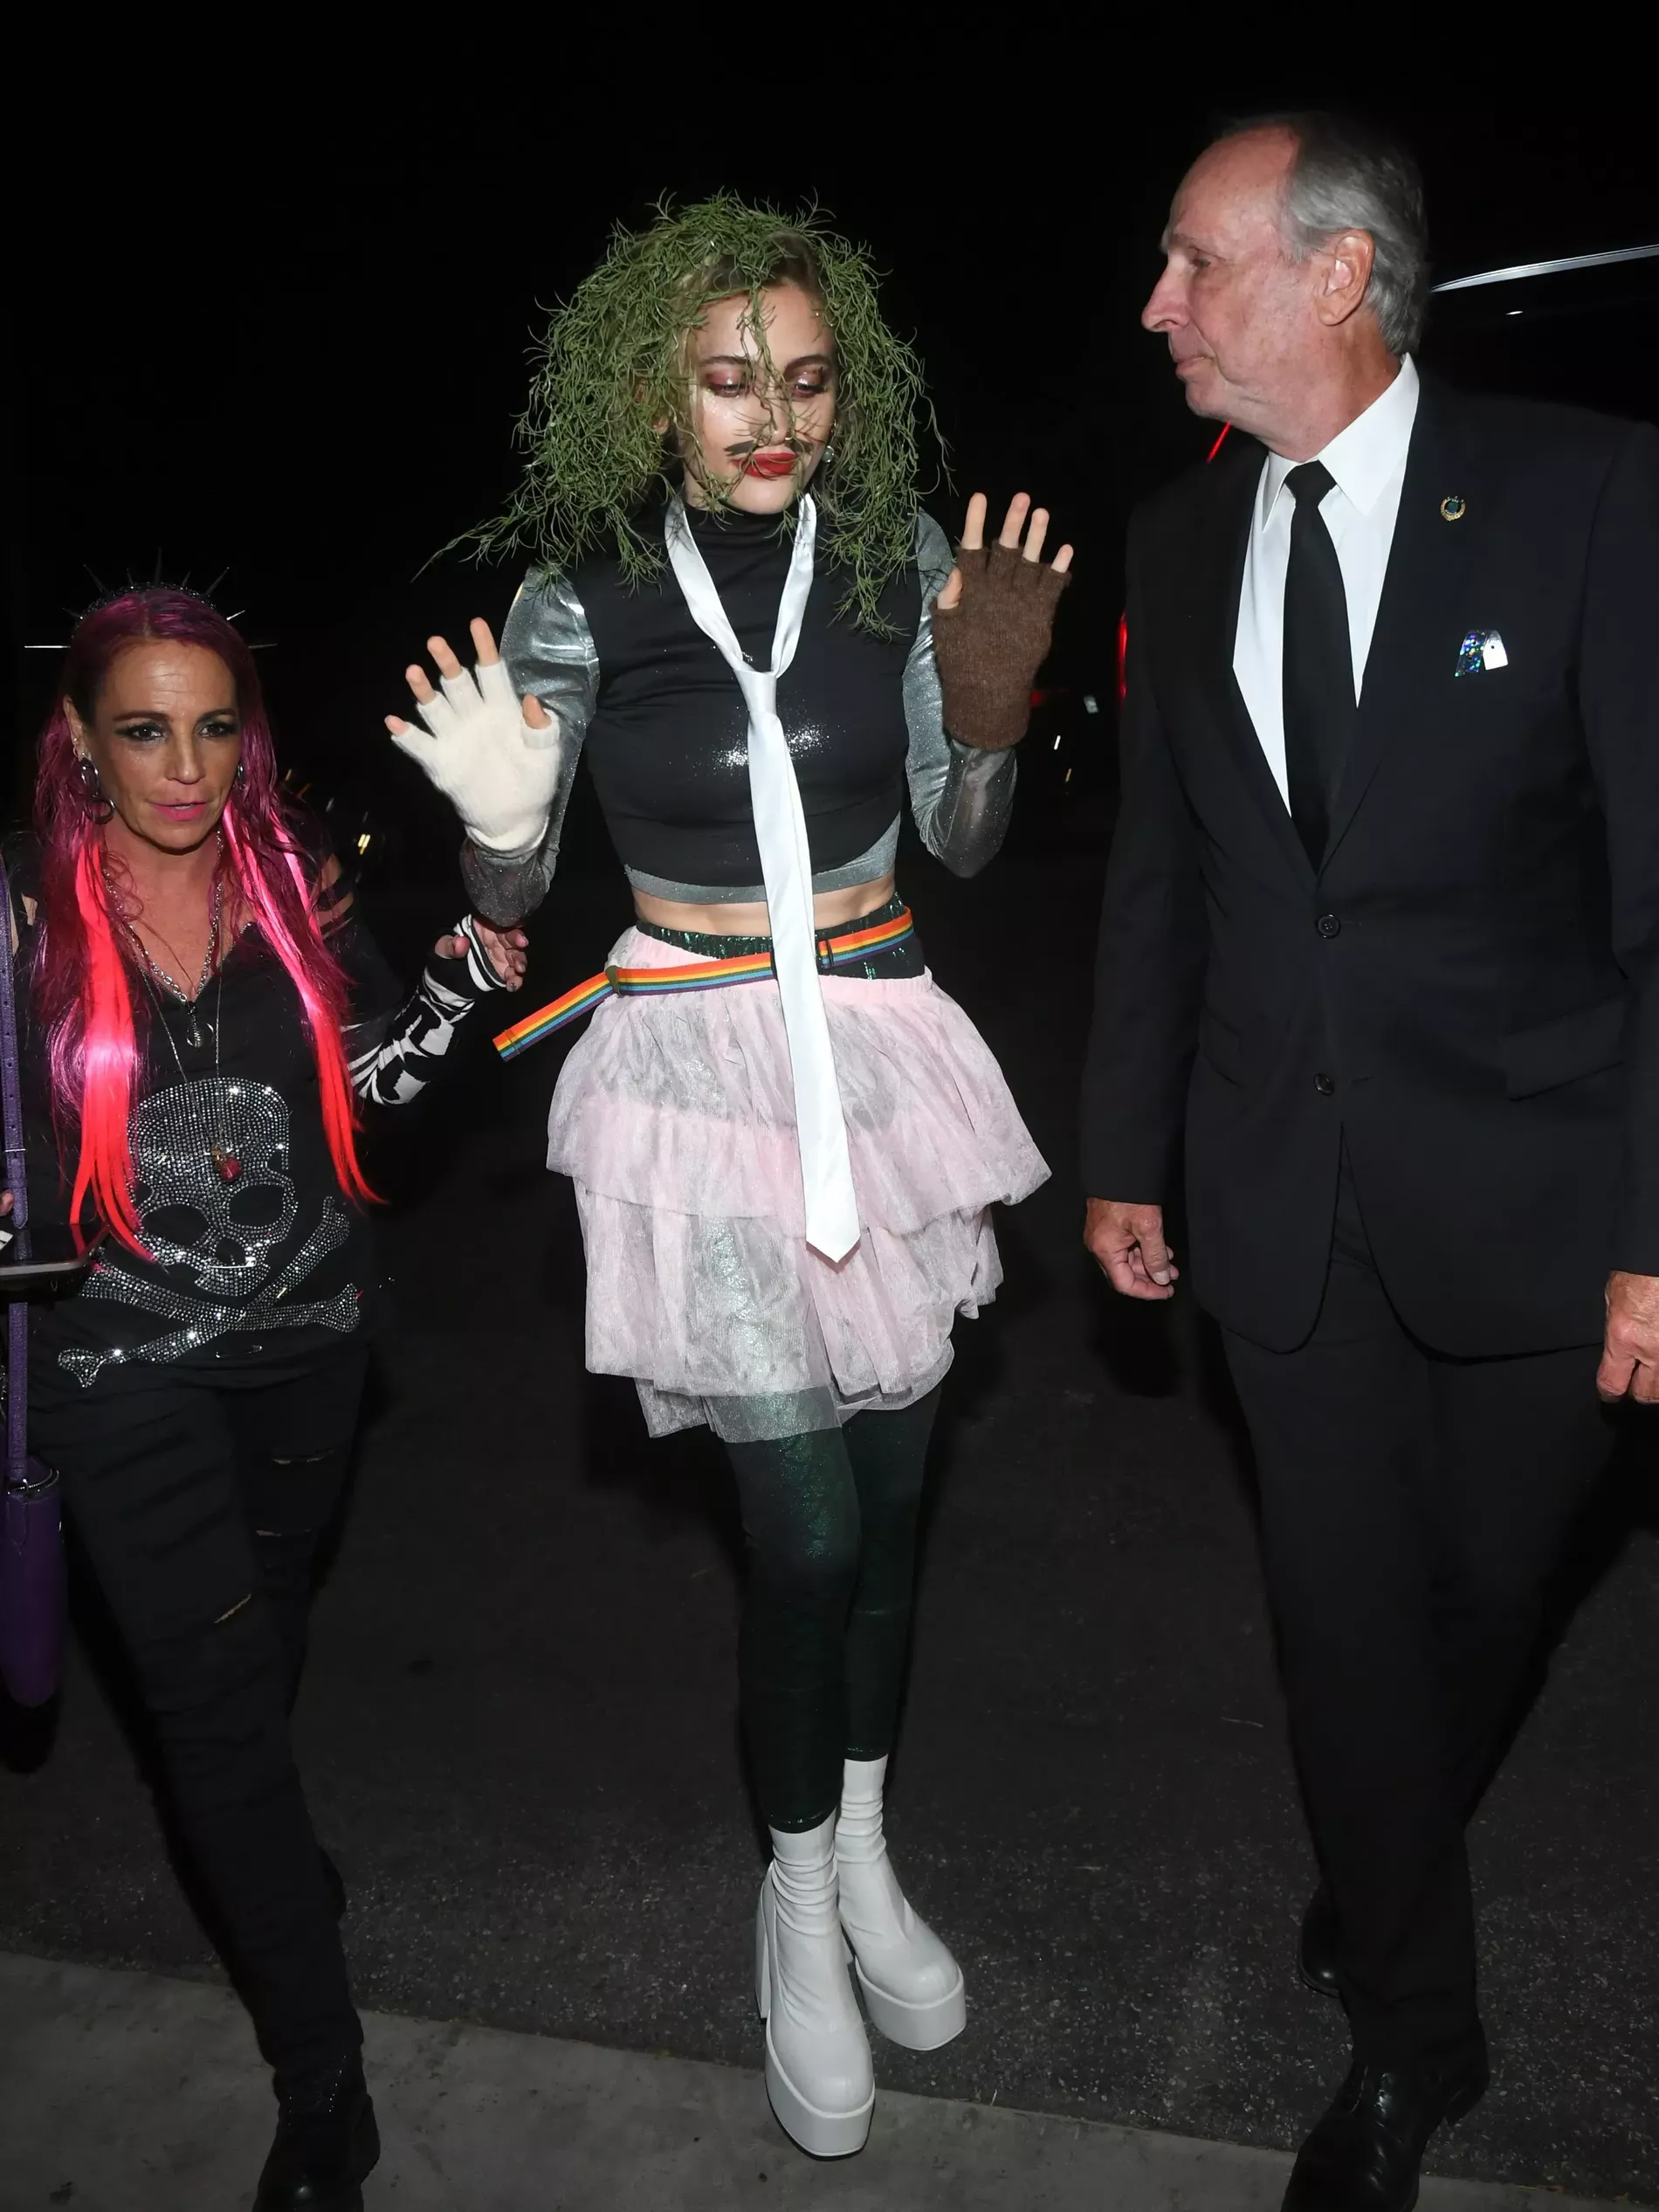 Paris Jackson dressed as Old Gregg from the British comedy series The Mighty Boosh.